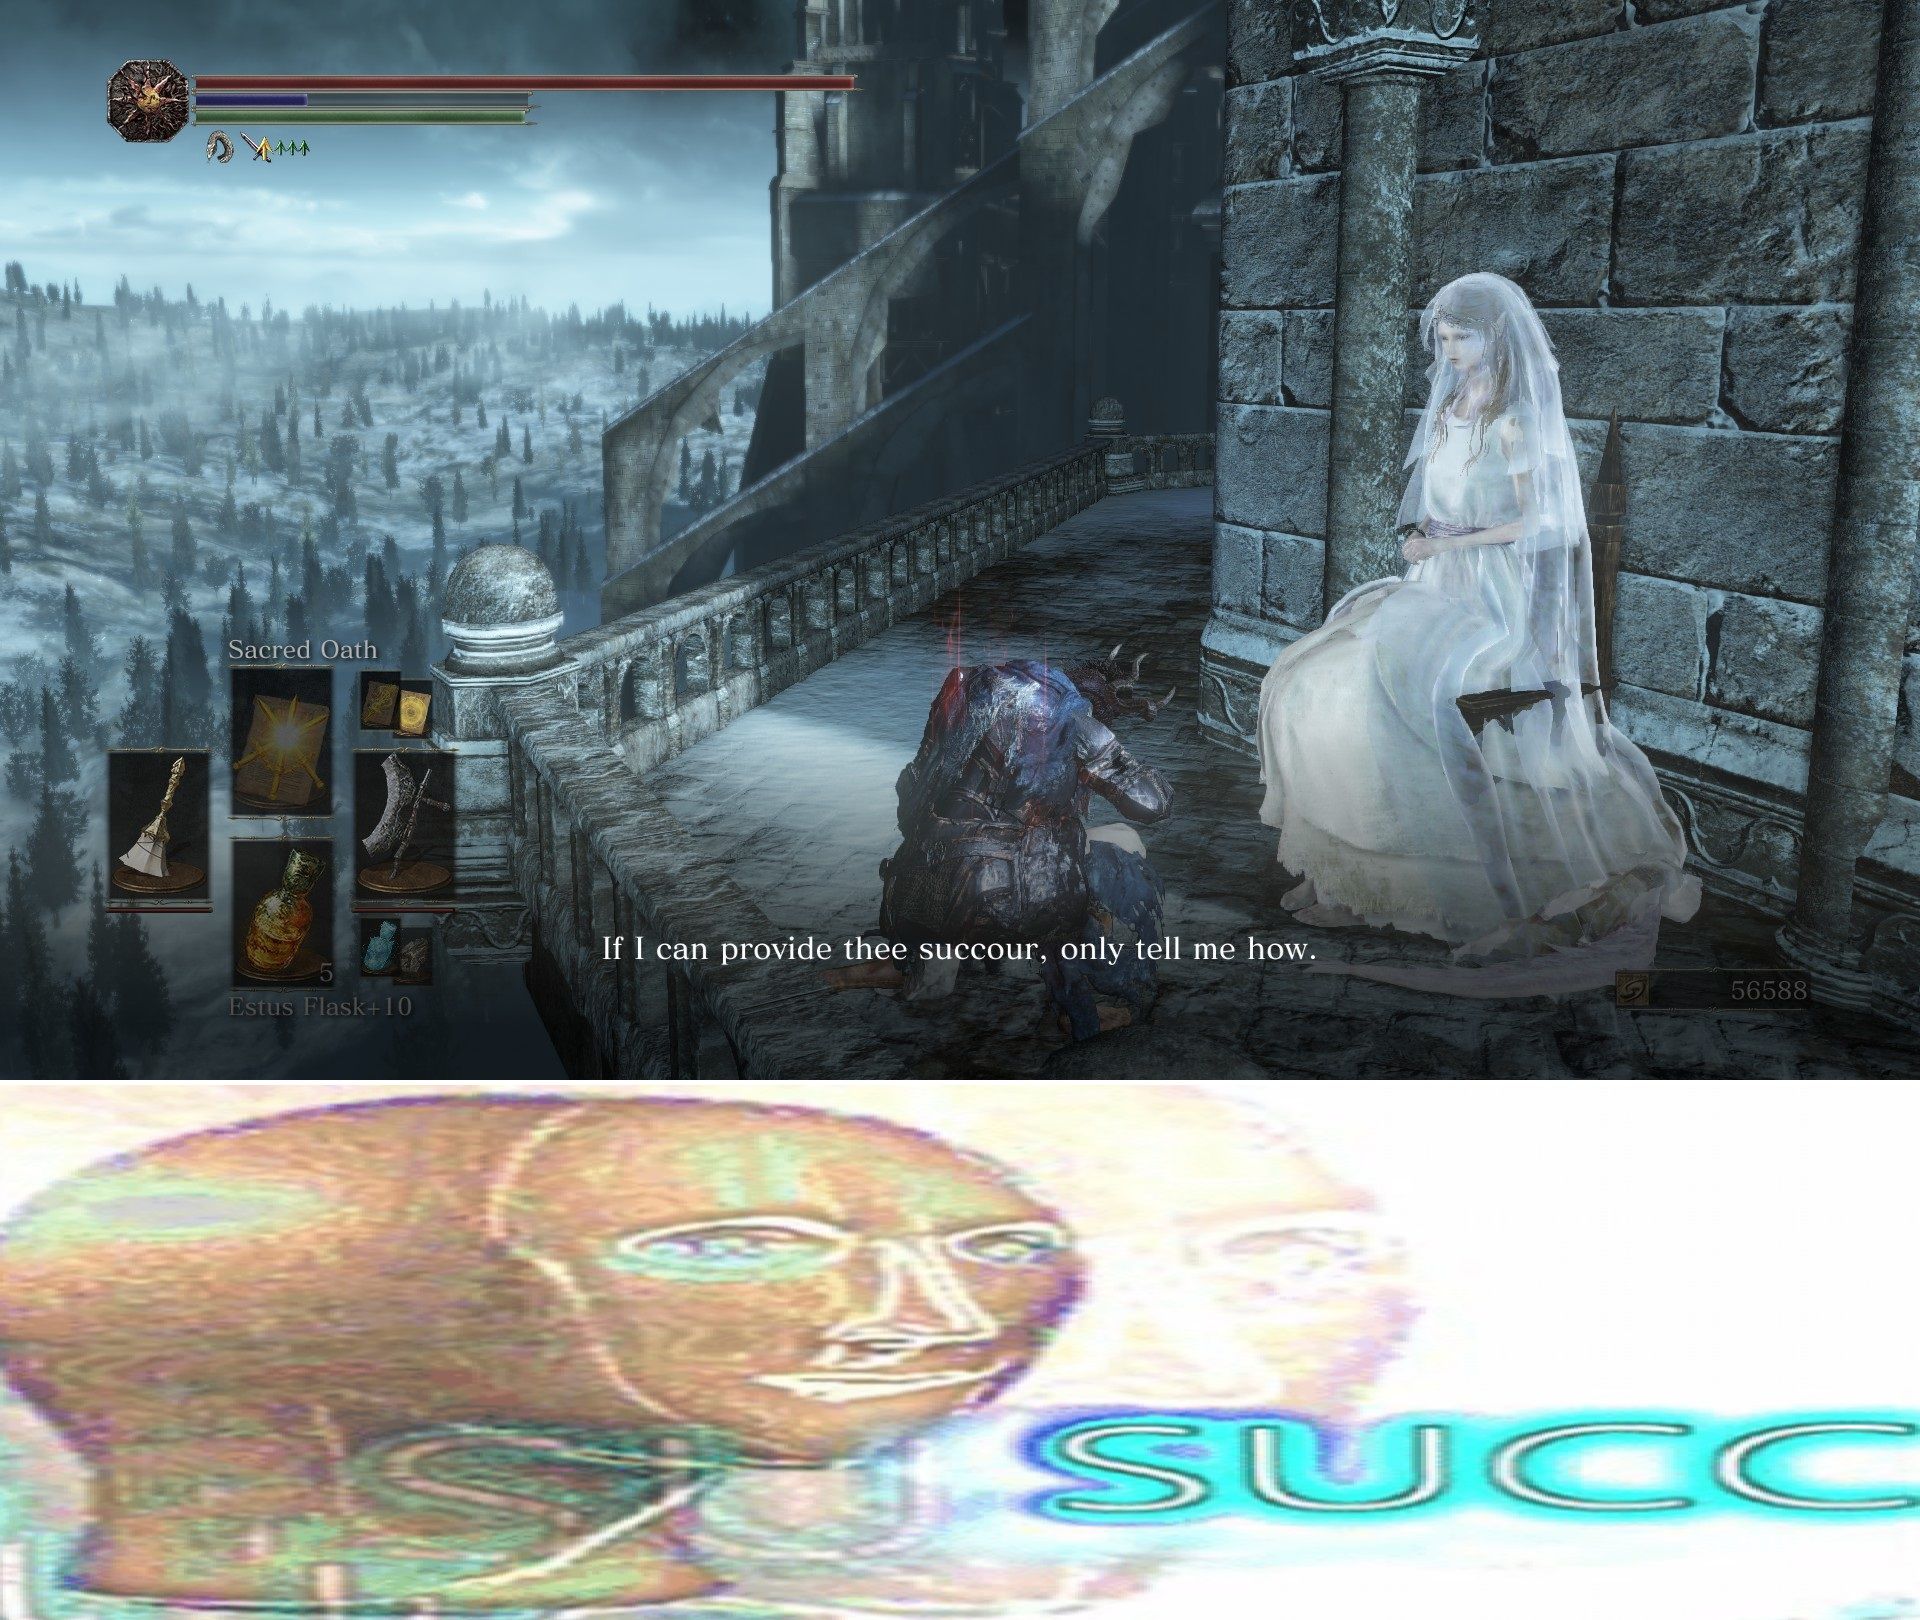 and another one dank souls meme